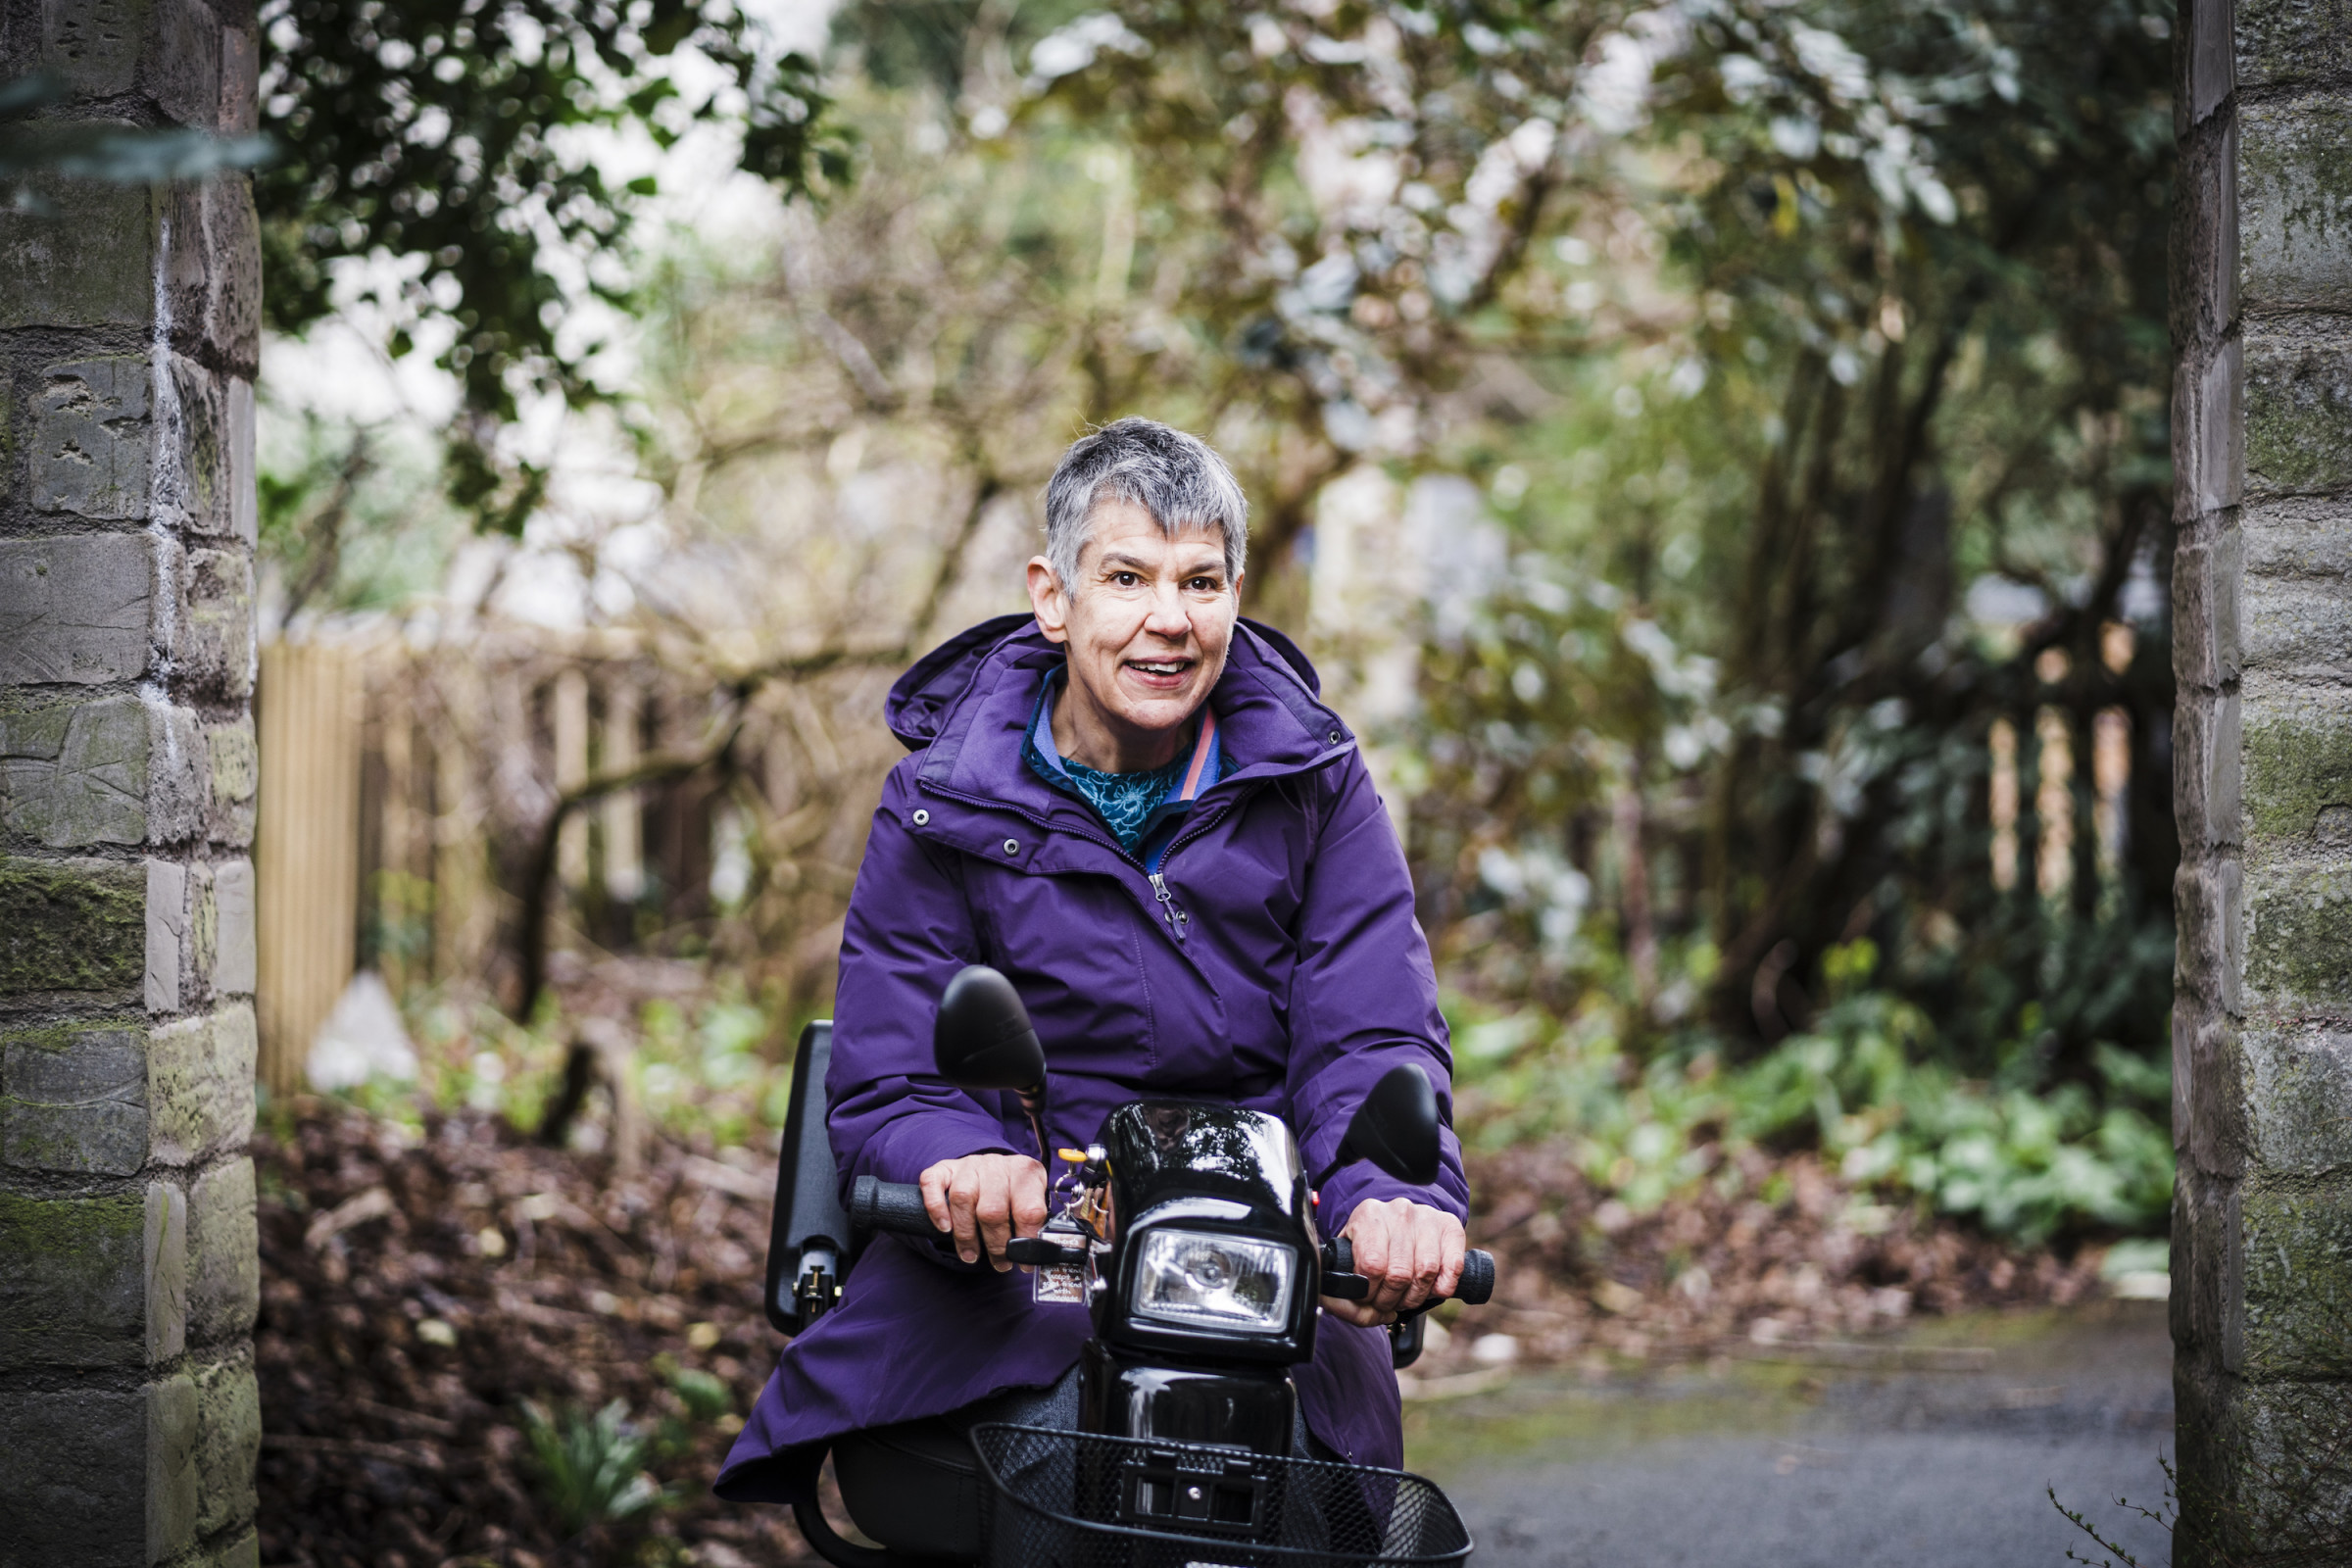 Wearing a purple winter coat, Annalu drives her motorized wheelchair through a stone gate on the wooded campus of Dundee University.